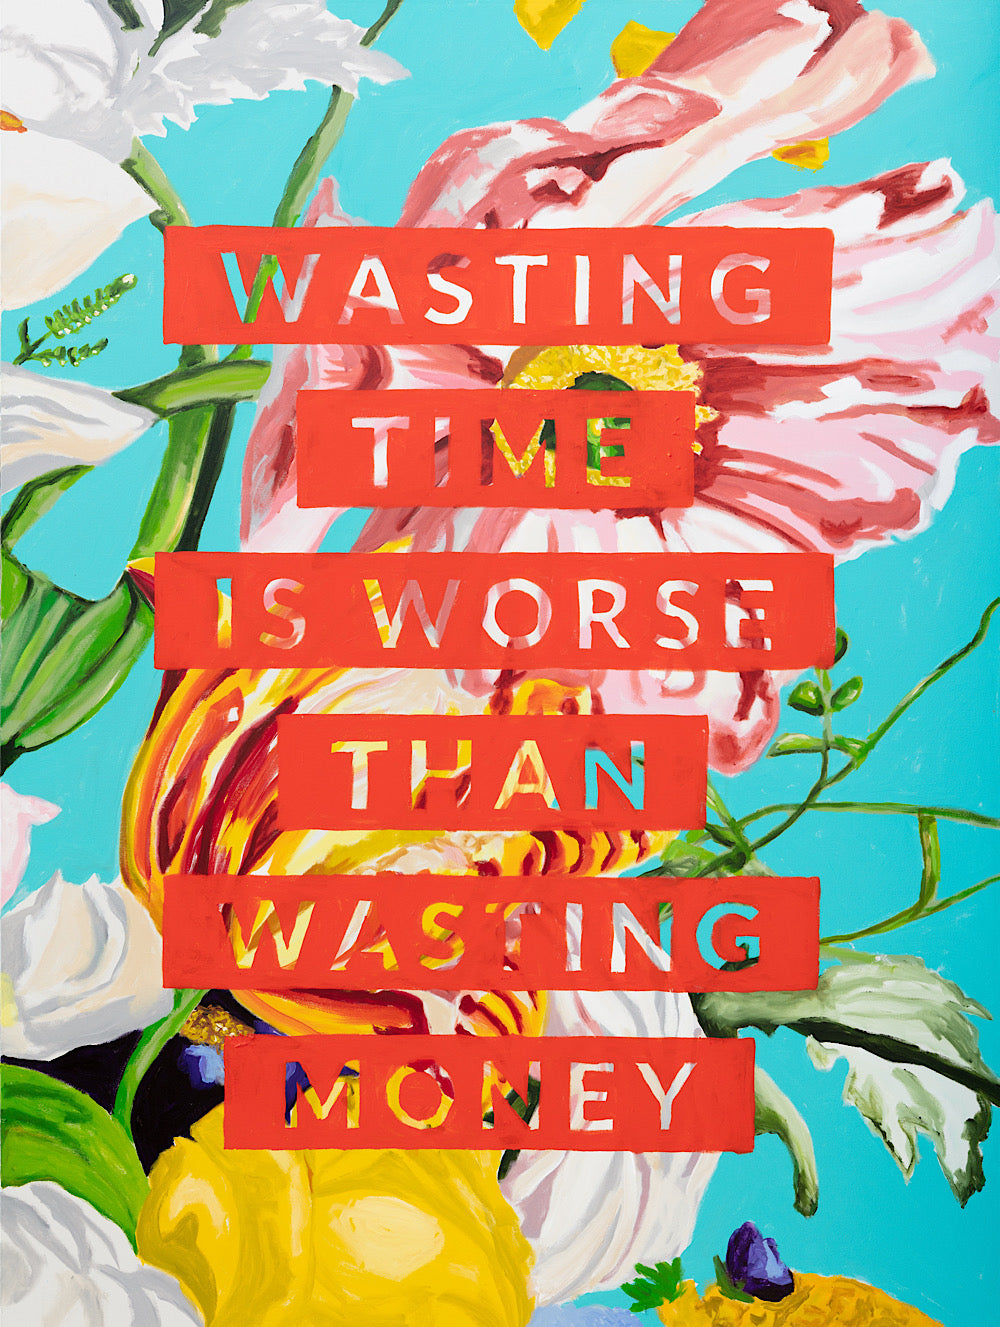 Wasting Time Is Worse Than Wasting Money